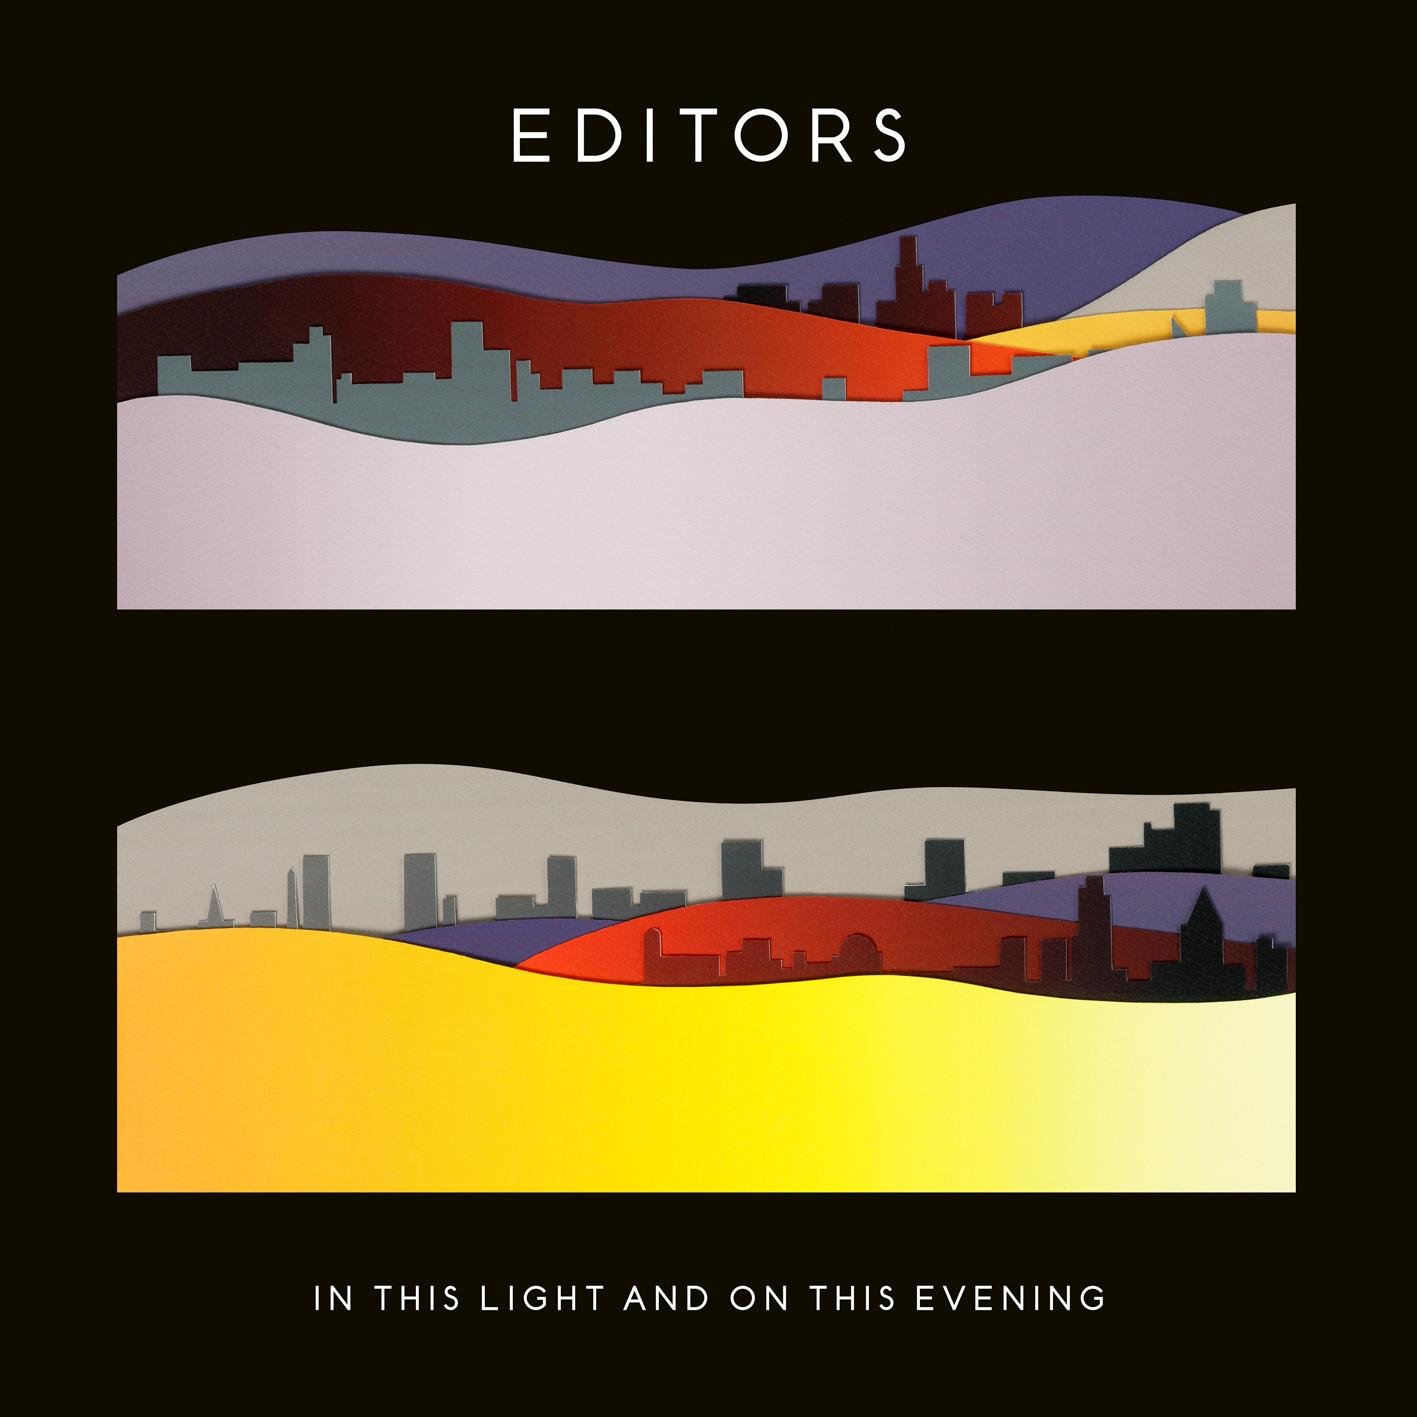 Editors-In This Light And On This Evening-16BIT-WEB-FLAC-2009-ENRiCH